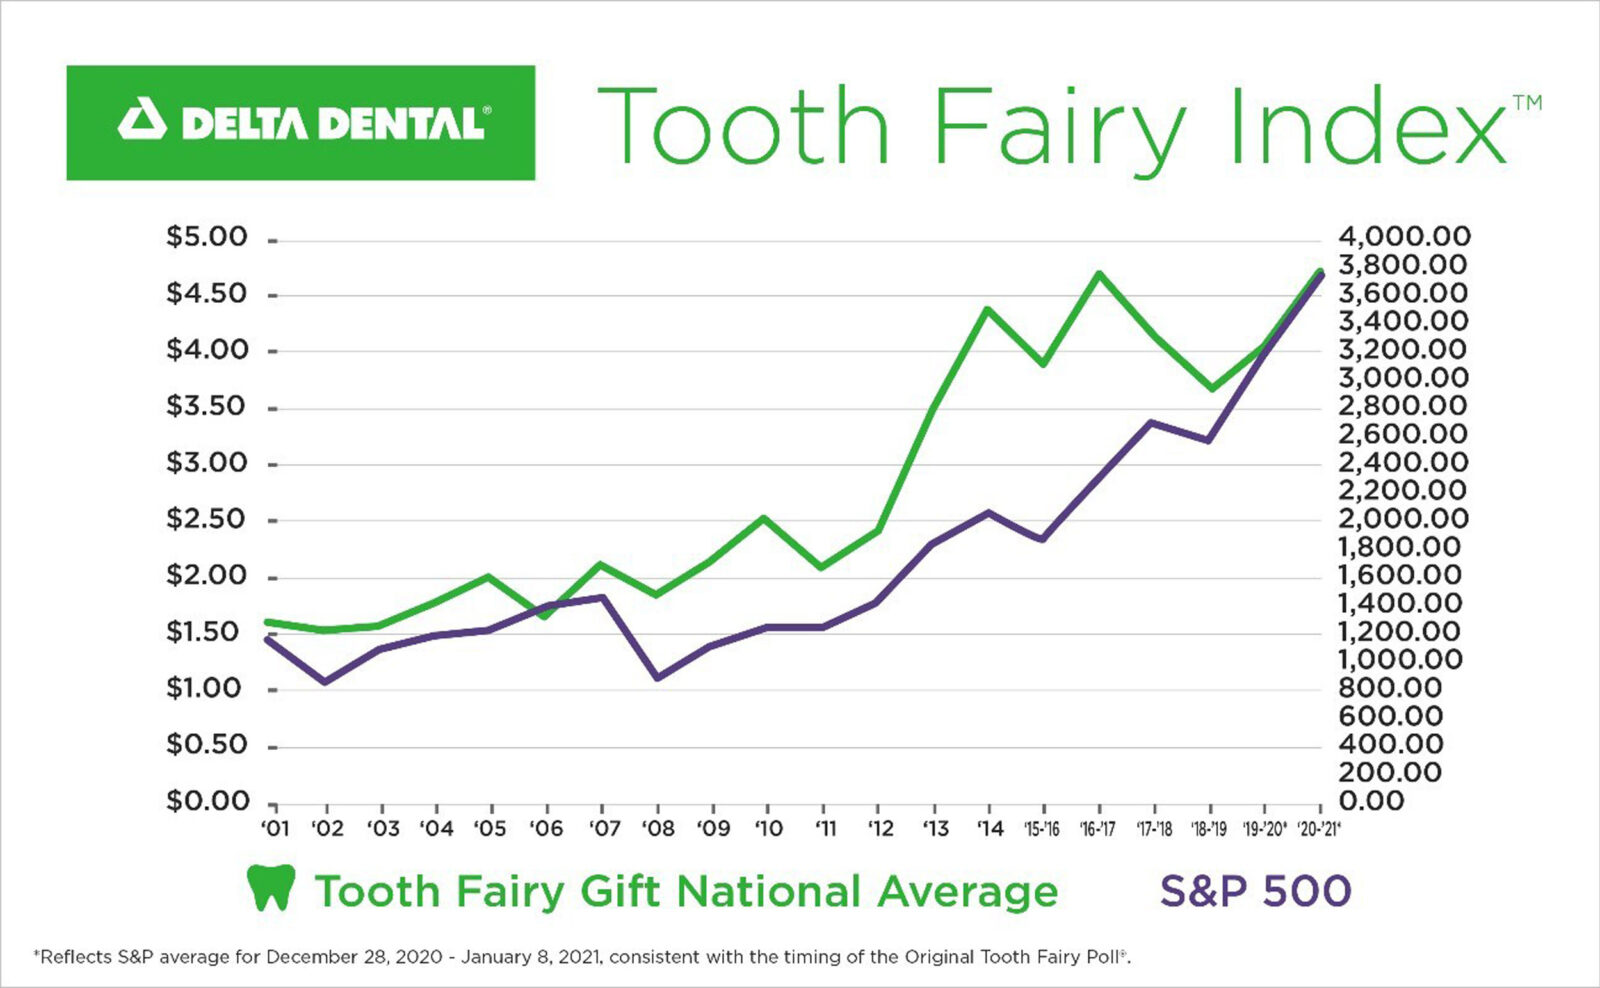 New Poll Shows Tooth Fairy Giving Is at an AllTime High